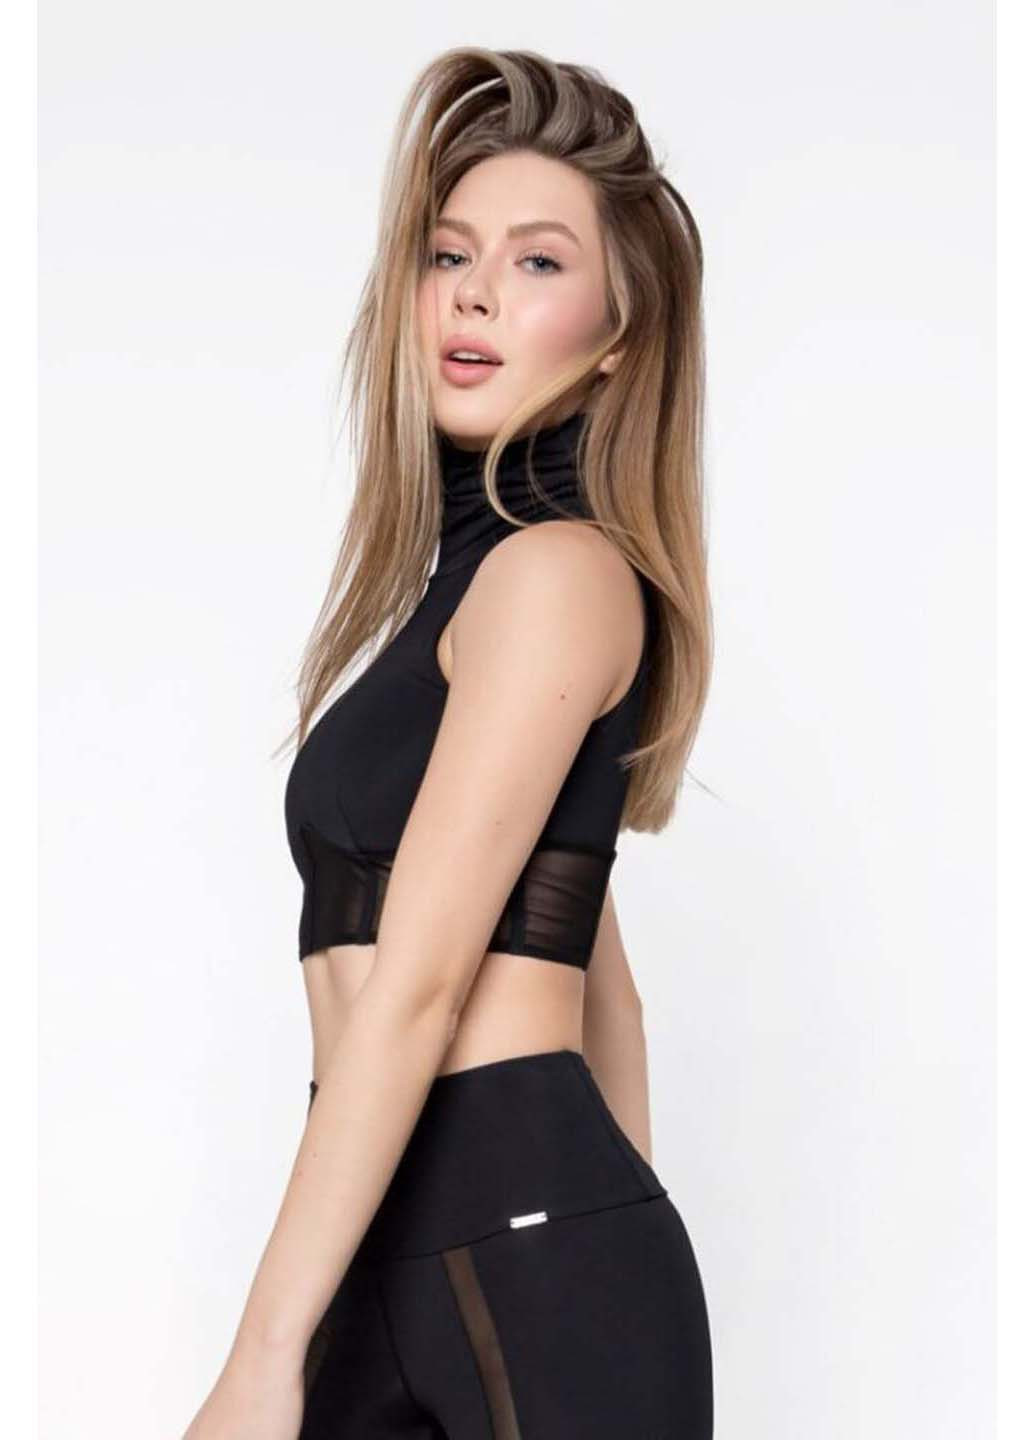 Топ Designed for fitness super sexy girl (249978816)